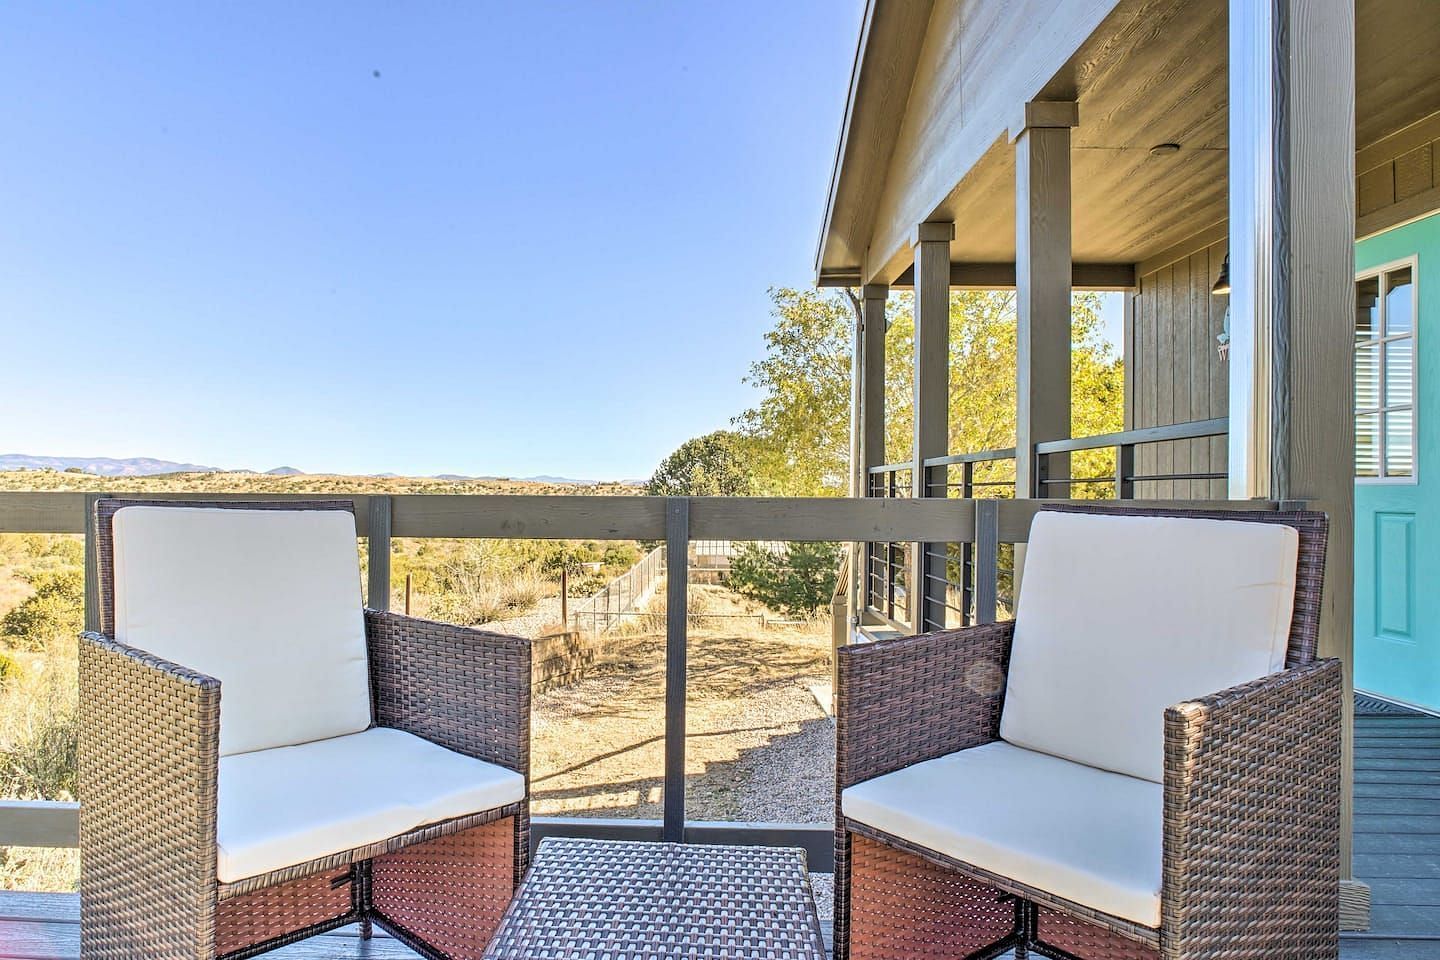 JWguest House at Silver City, New Mexico | 'The Quail' cottage, next to Silver City Oasis with Views | Jwbnb no brobnb 19